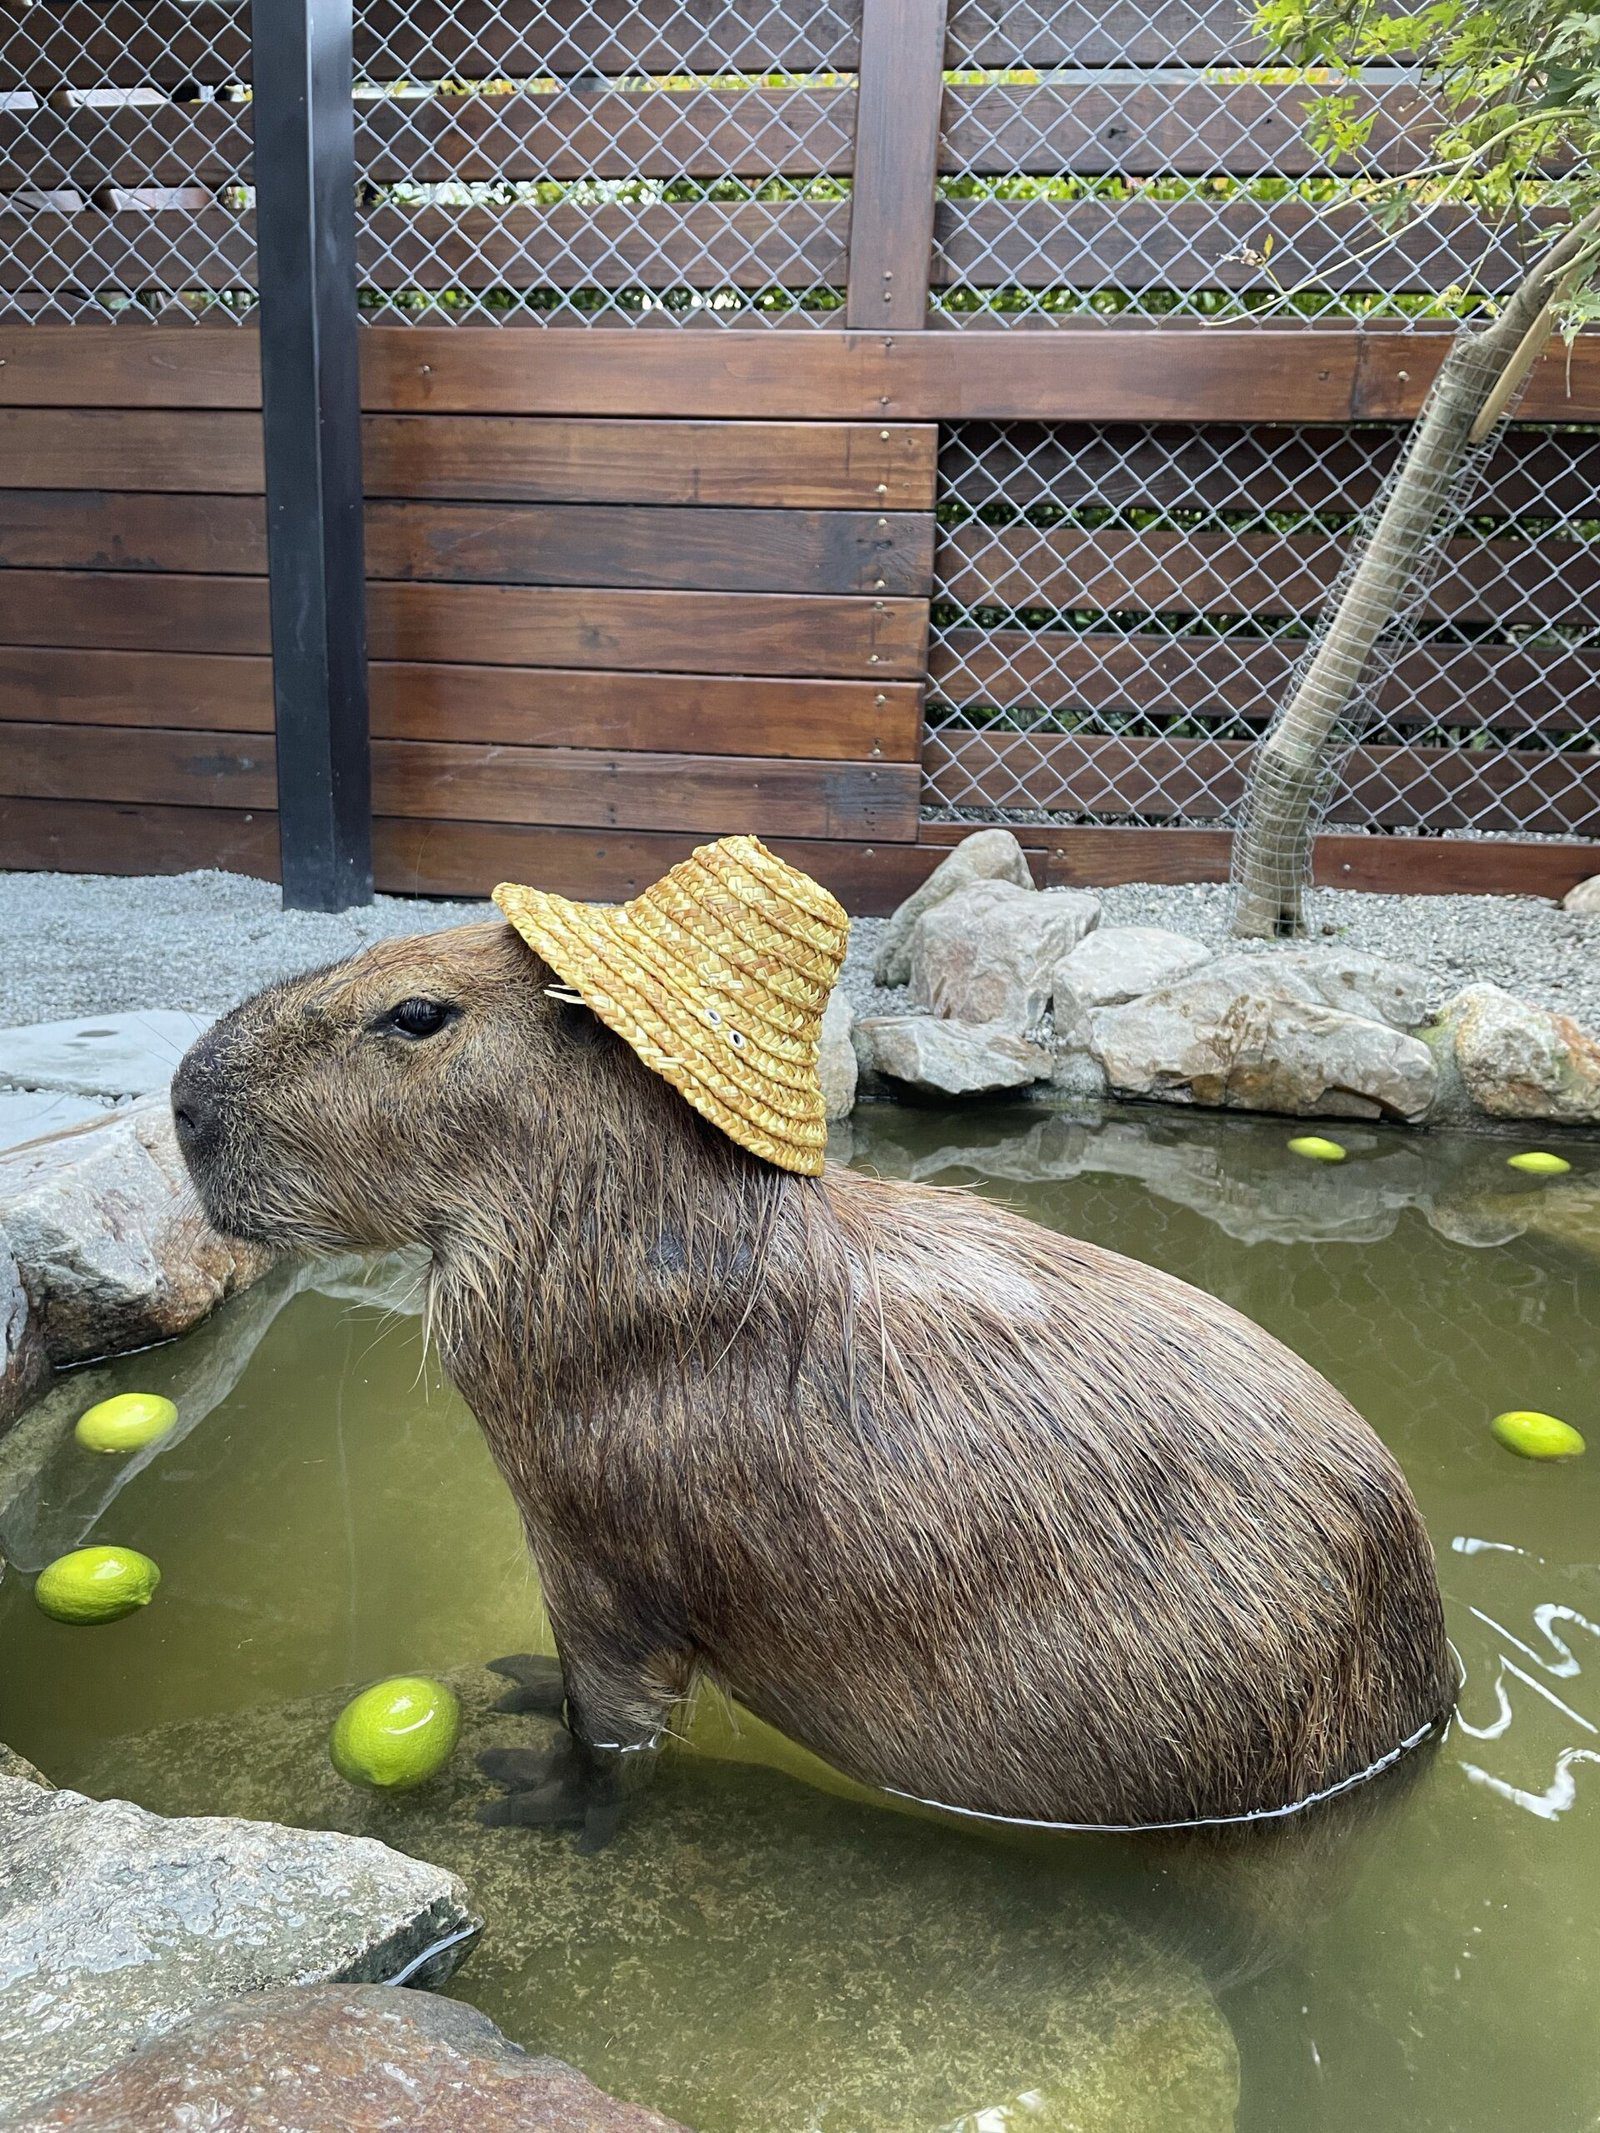 The Price of Capybaras: Are They Affordable?